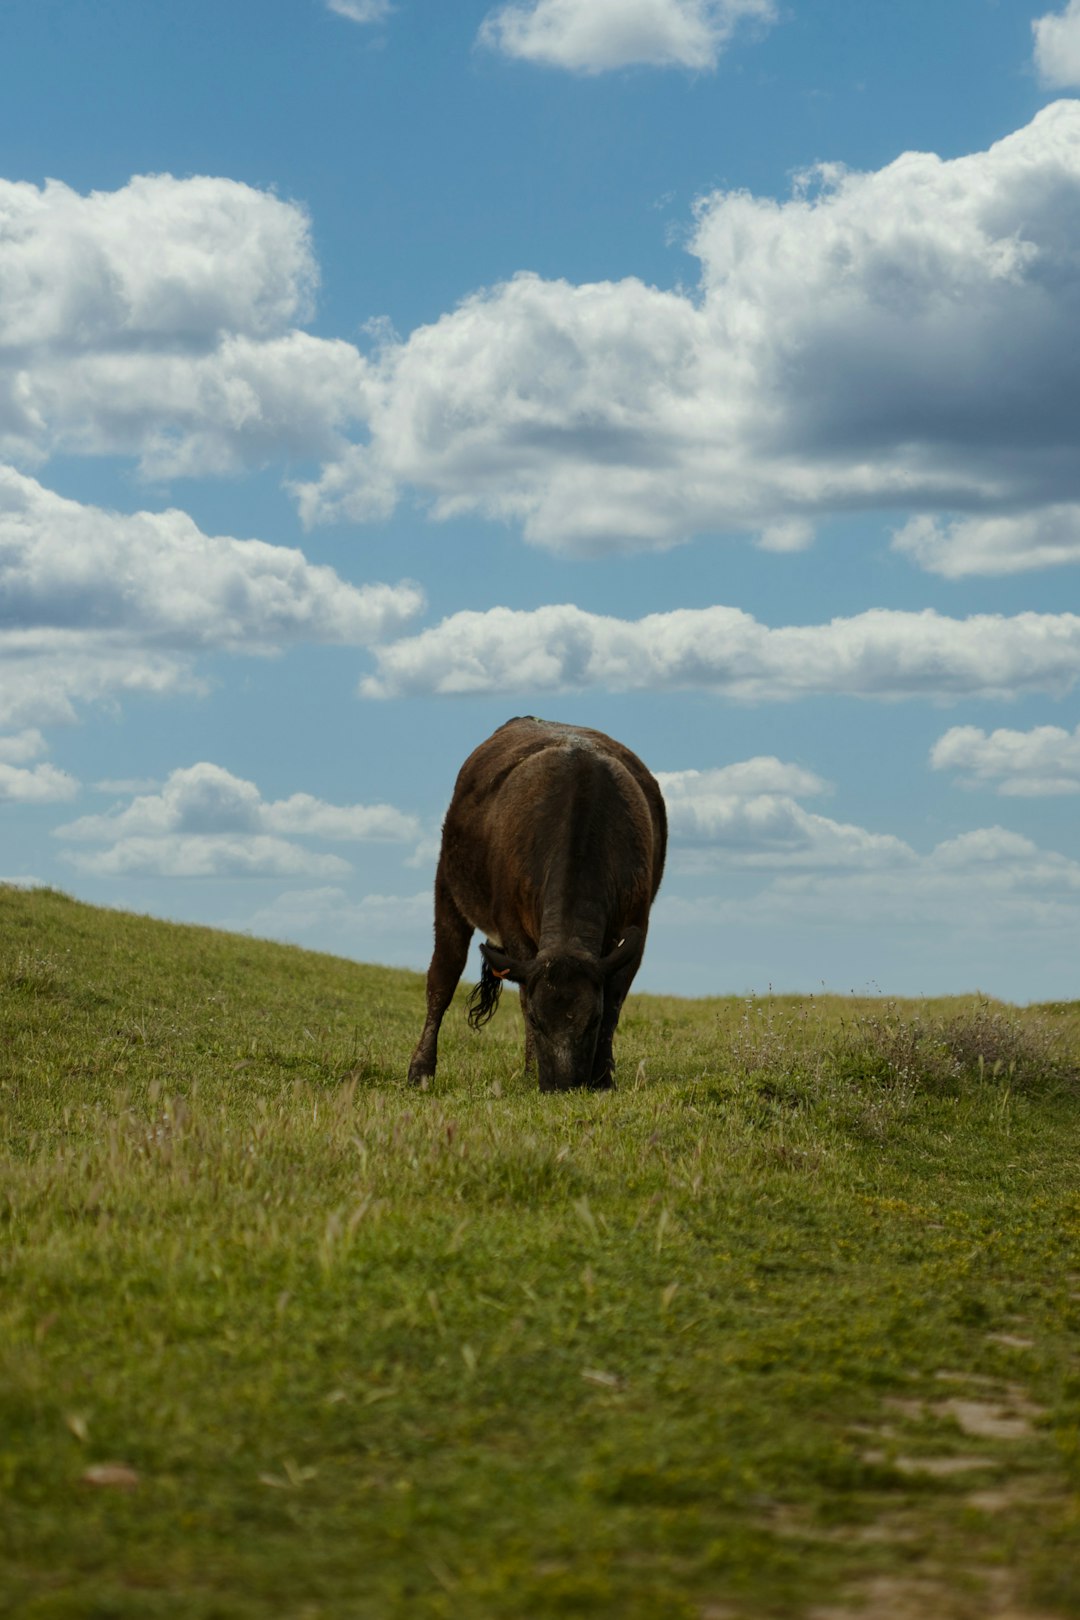 brown cow on green grass field under white clouds and blue sky during daytime